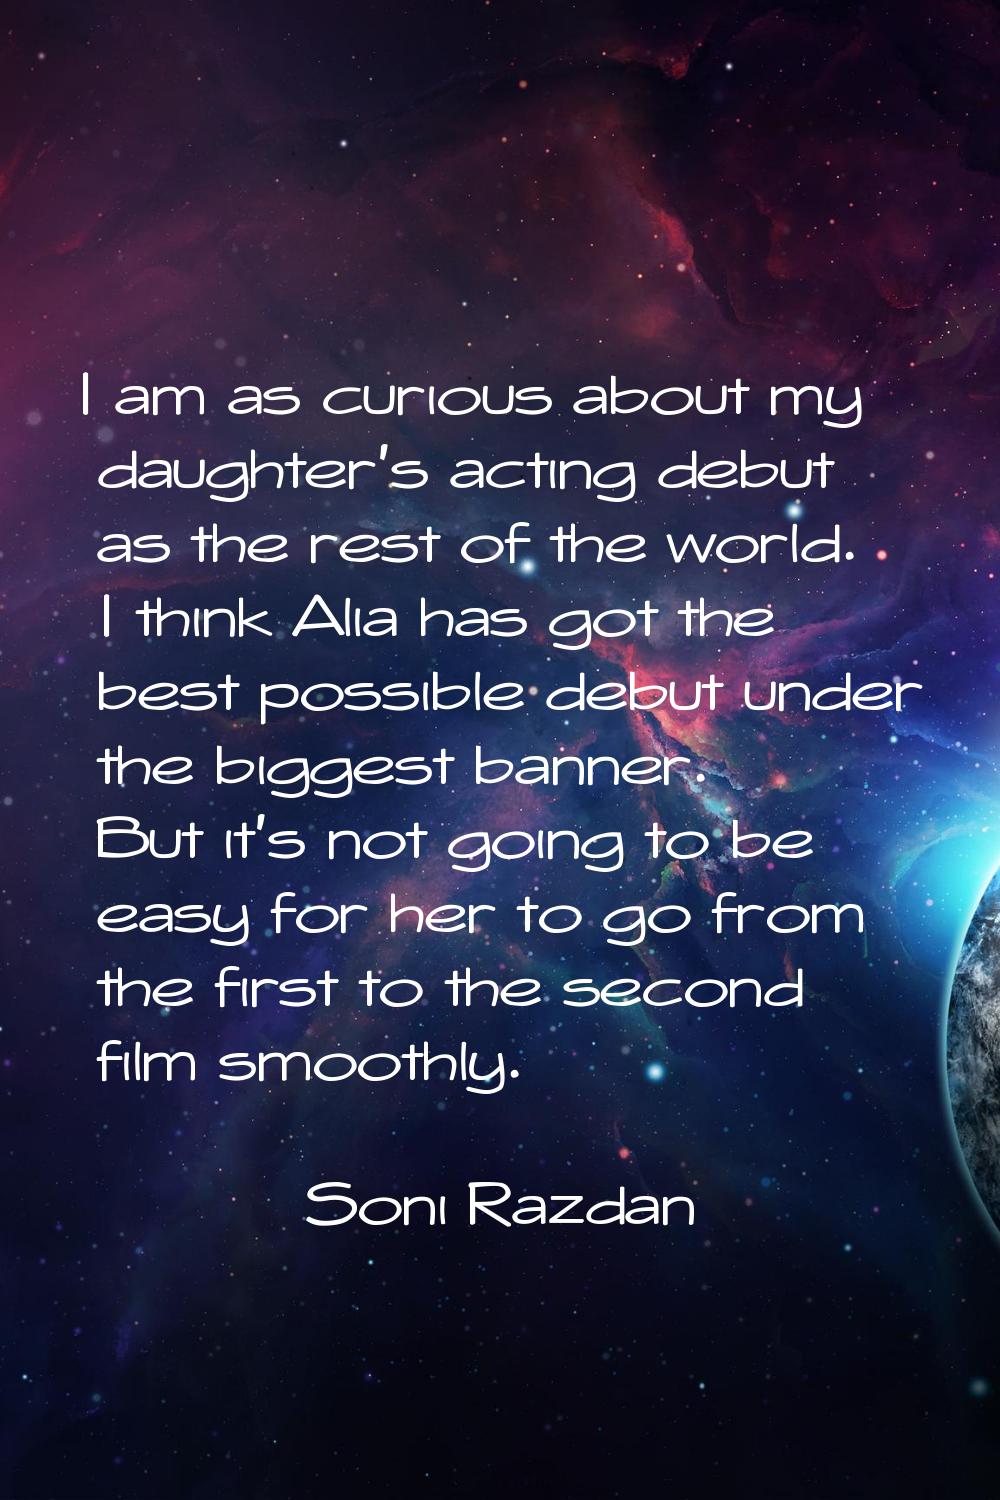 I am as curious about my daughter's acting debut as the rest of the world. I think Alia has got the